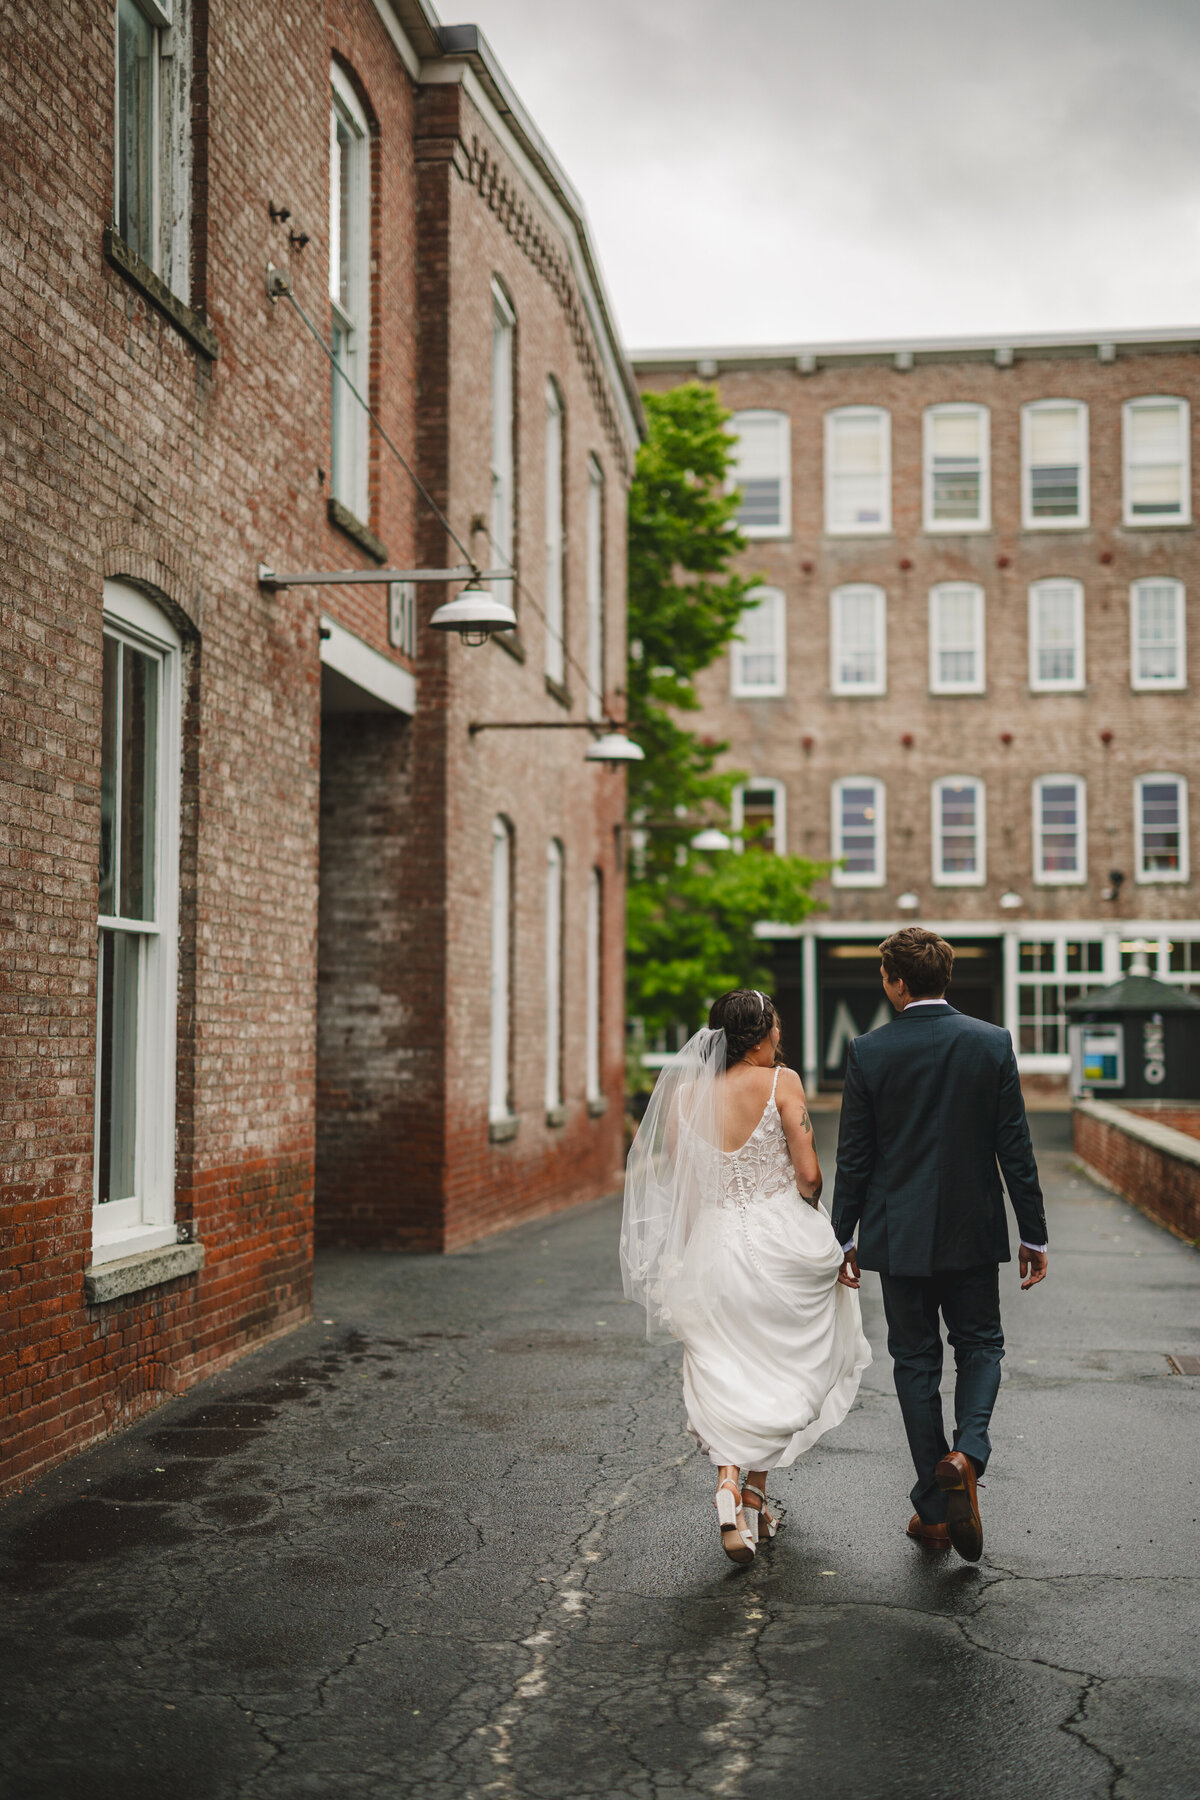 Witness the magic of this breathtaking wedding moment at MASS MoCA Wedding, skillfully captured by photographer Matthew Cavanaugh.